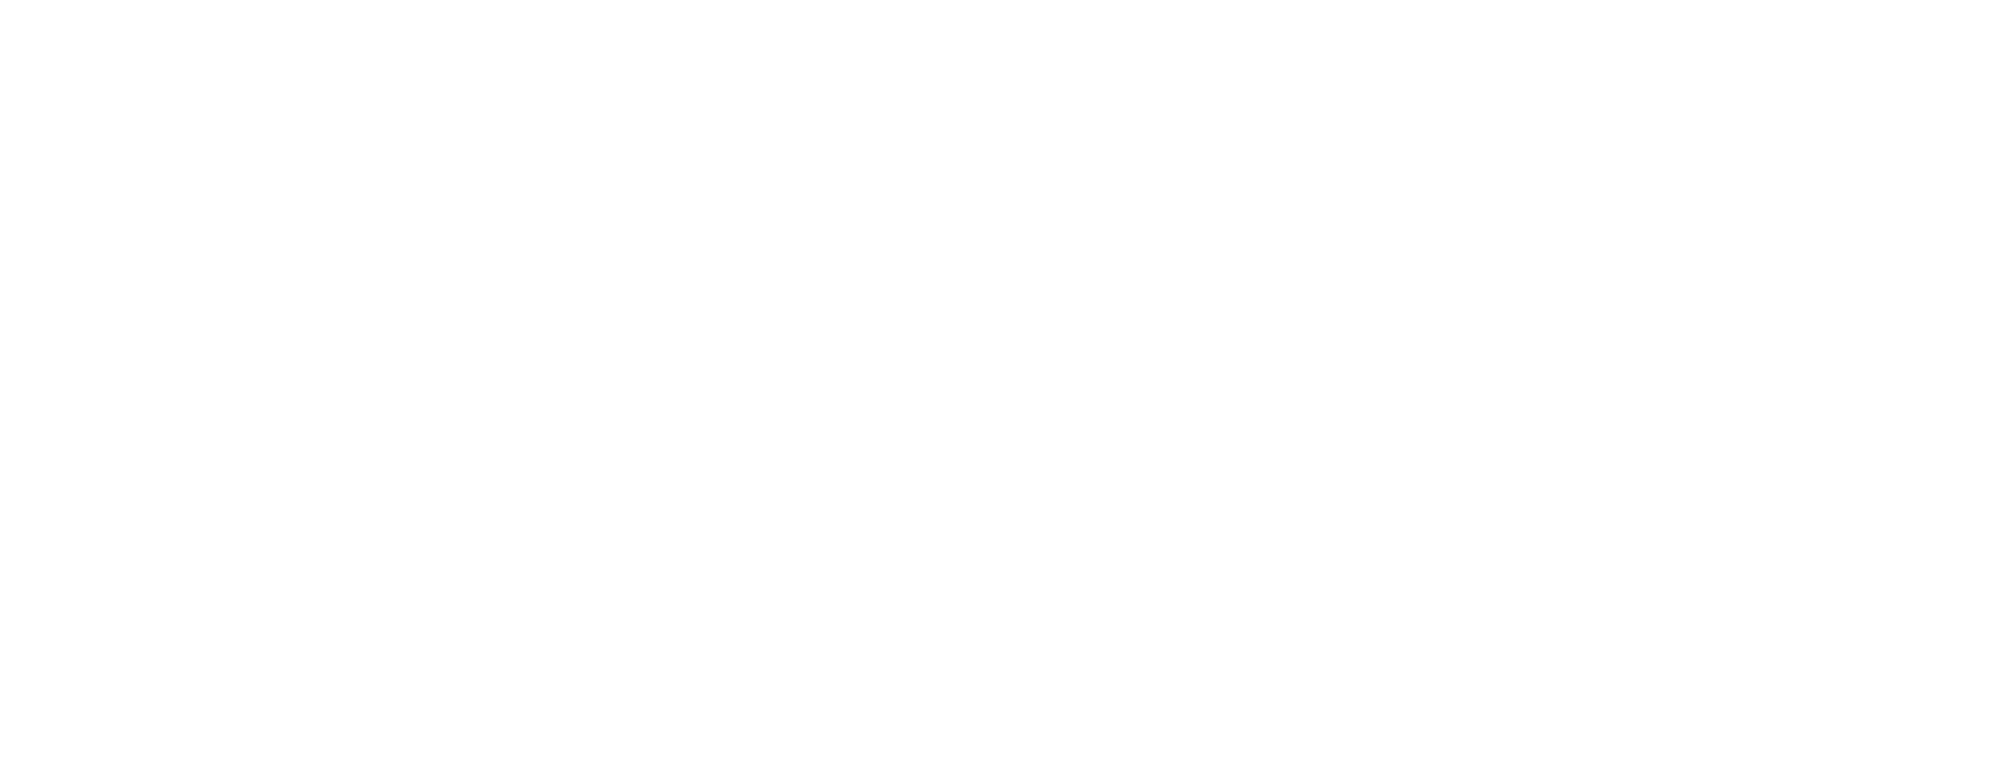 OpenFF Toolkit 0.14.5+0.g2227553.dirty documentation logo